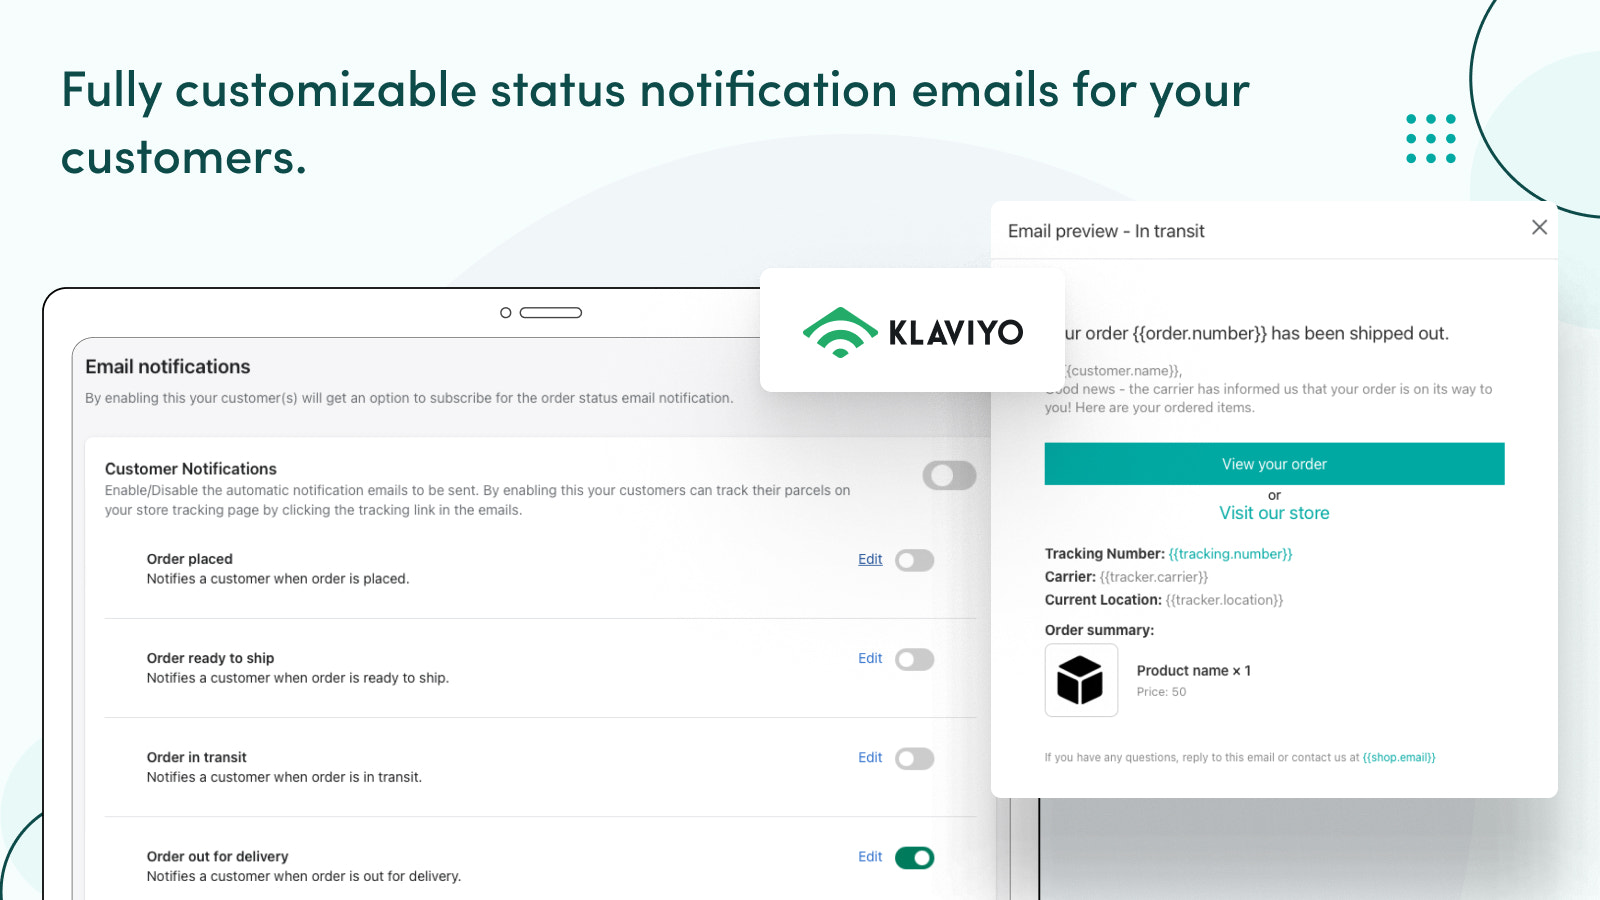 Fully customizable status notification emails for your customers